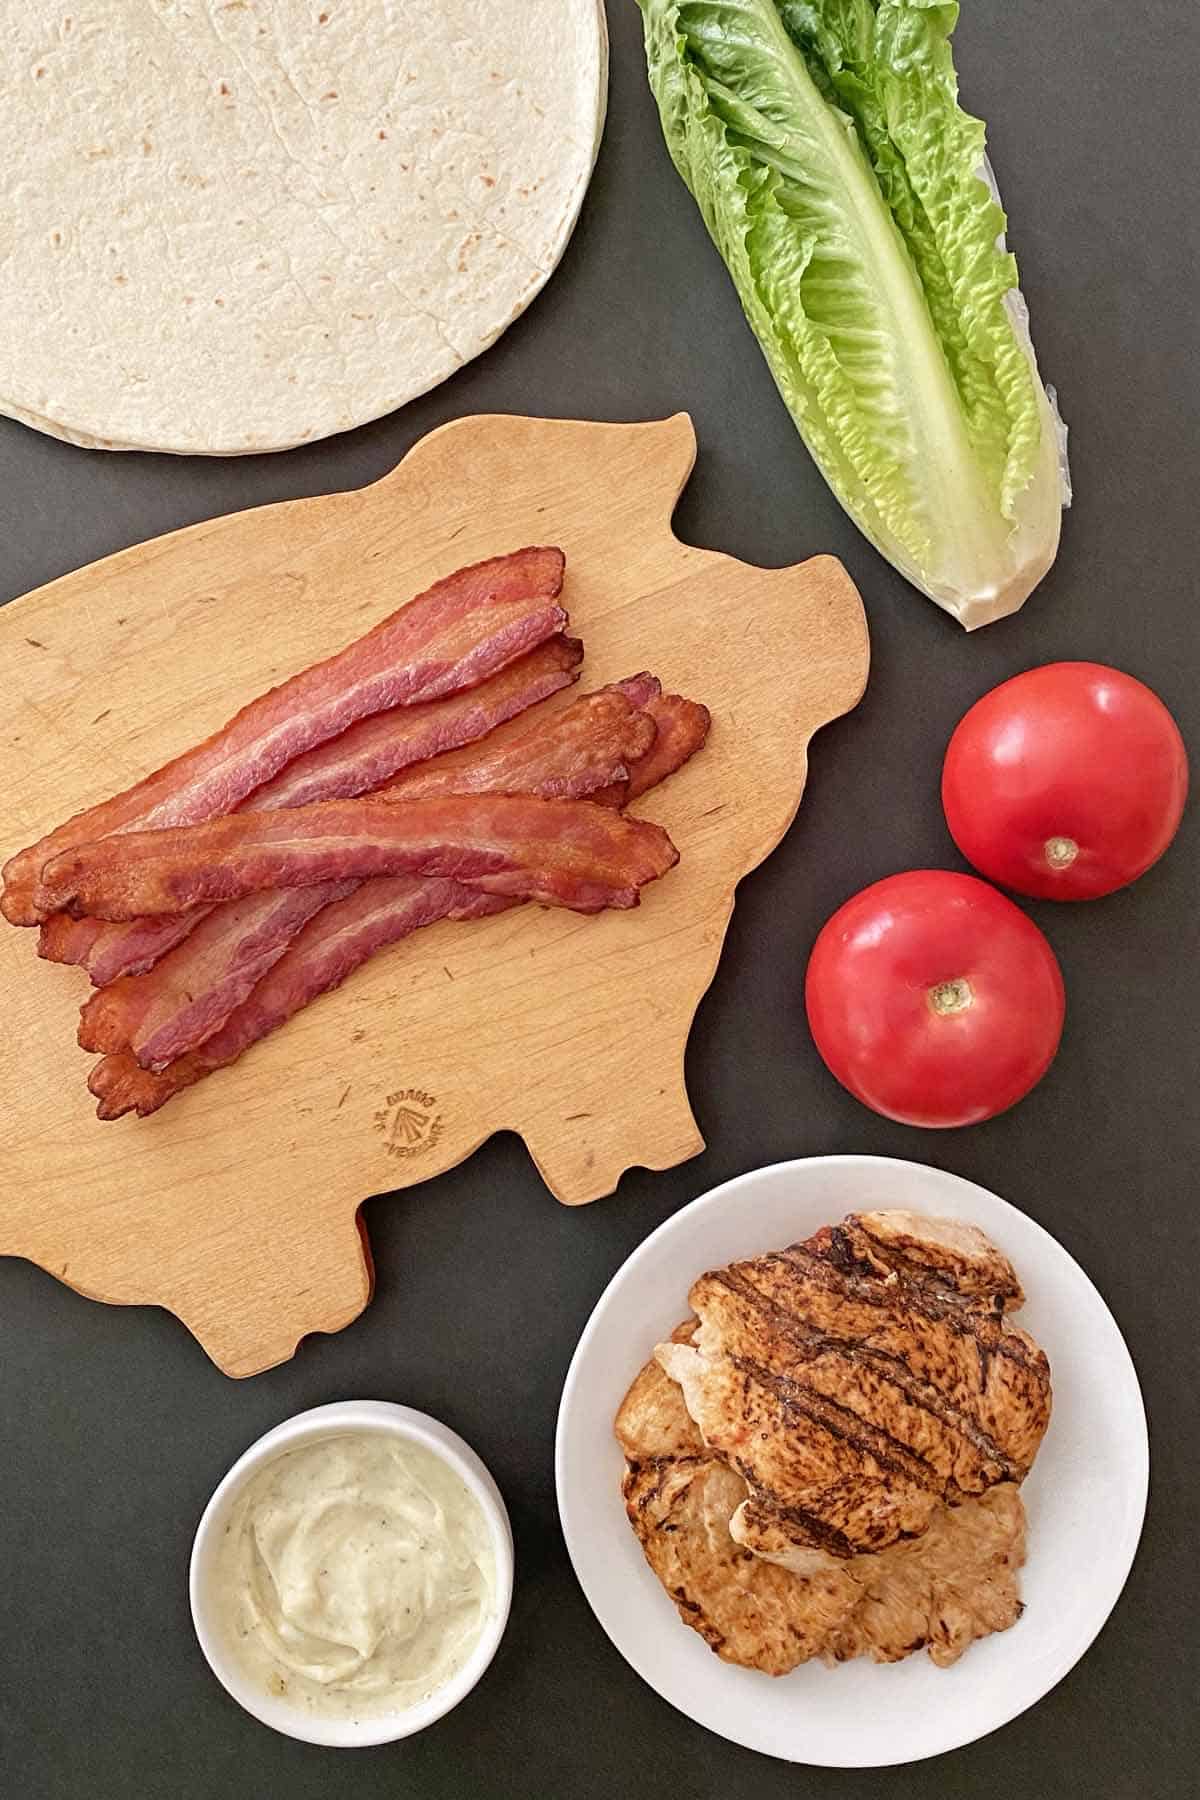 Flour tortillas, a head of romaine lettuce, 6 cooked bacon strips, 2 tomatoes, ranch mayonnaise, and 2 grilled chicken breasts.